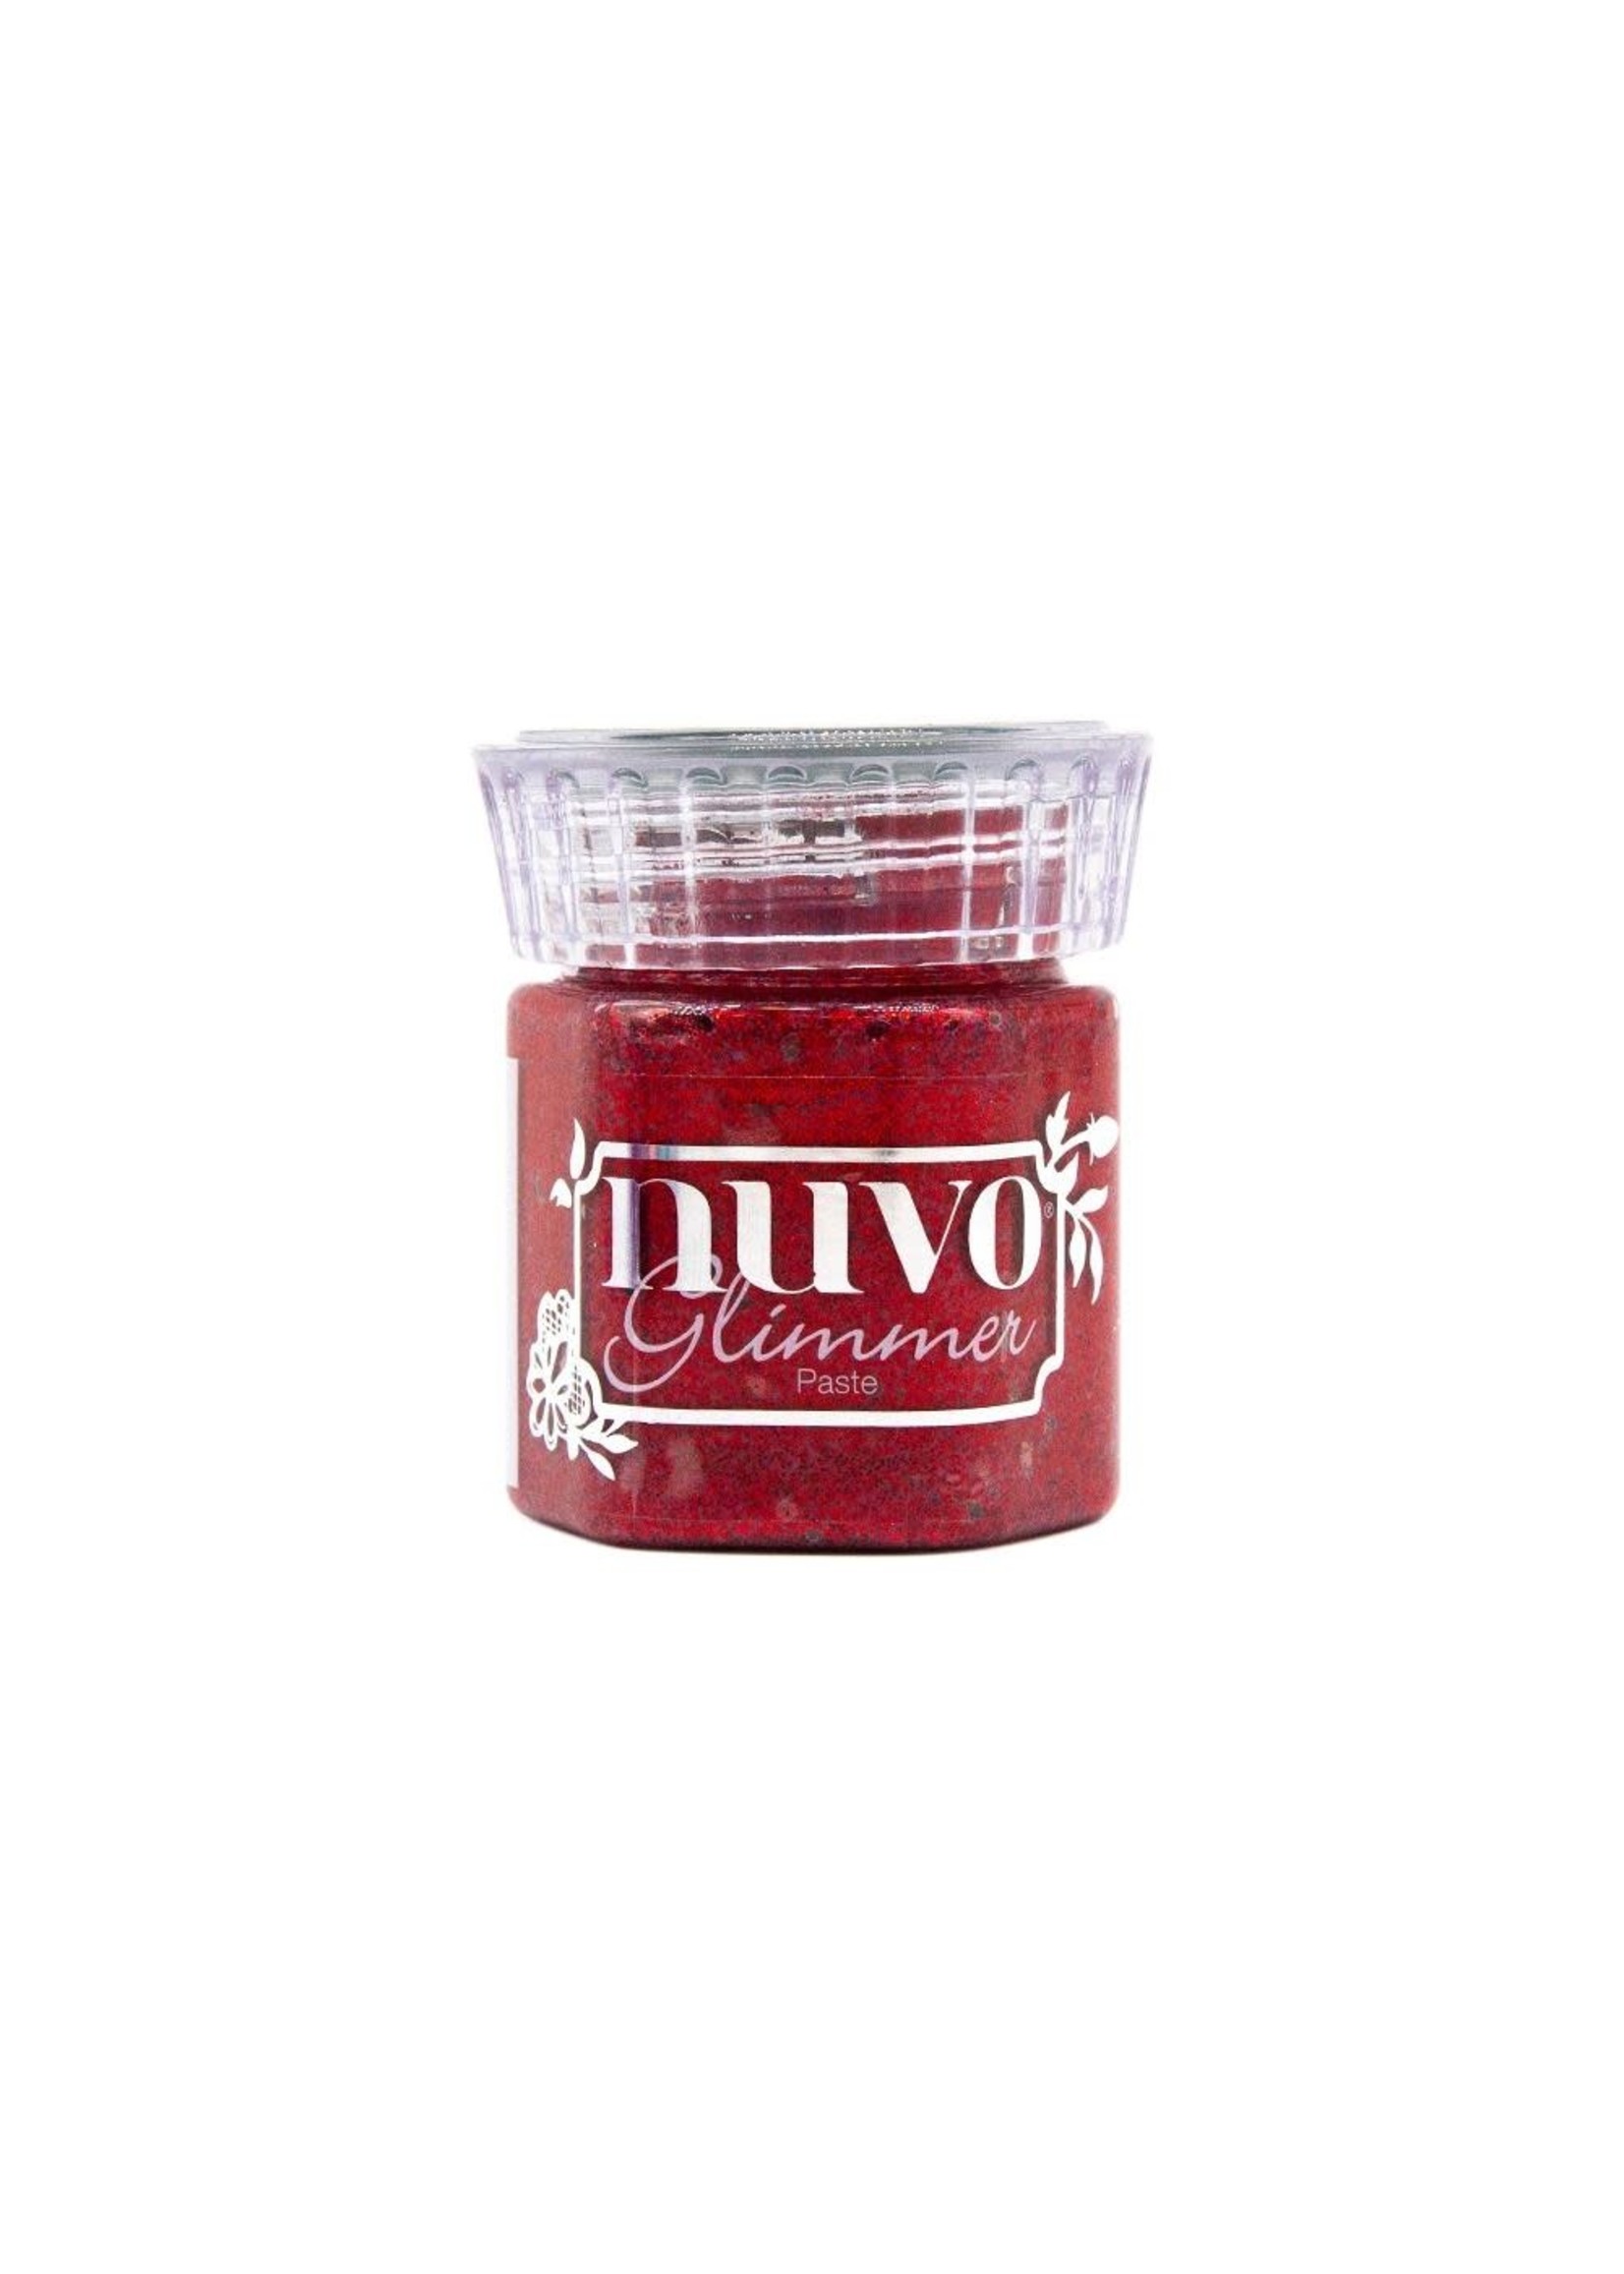 Nuvo NUVO glimmer paste red